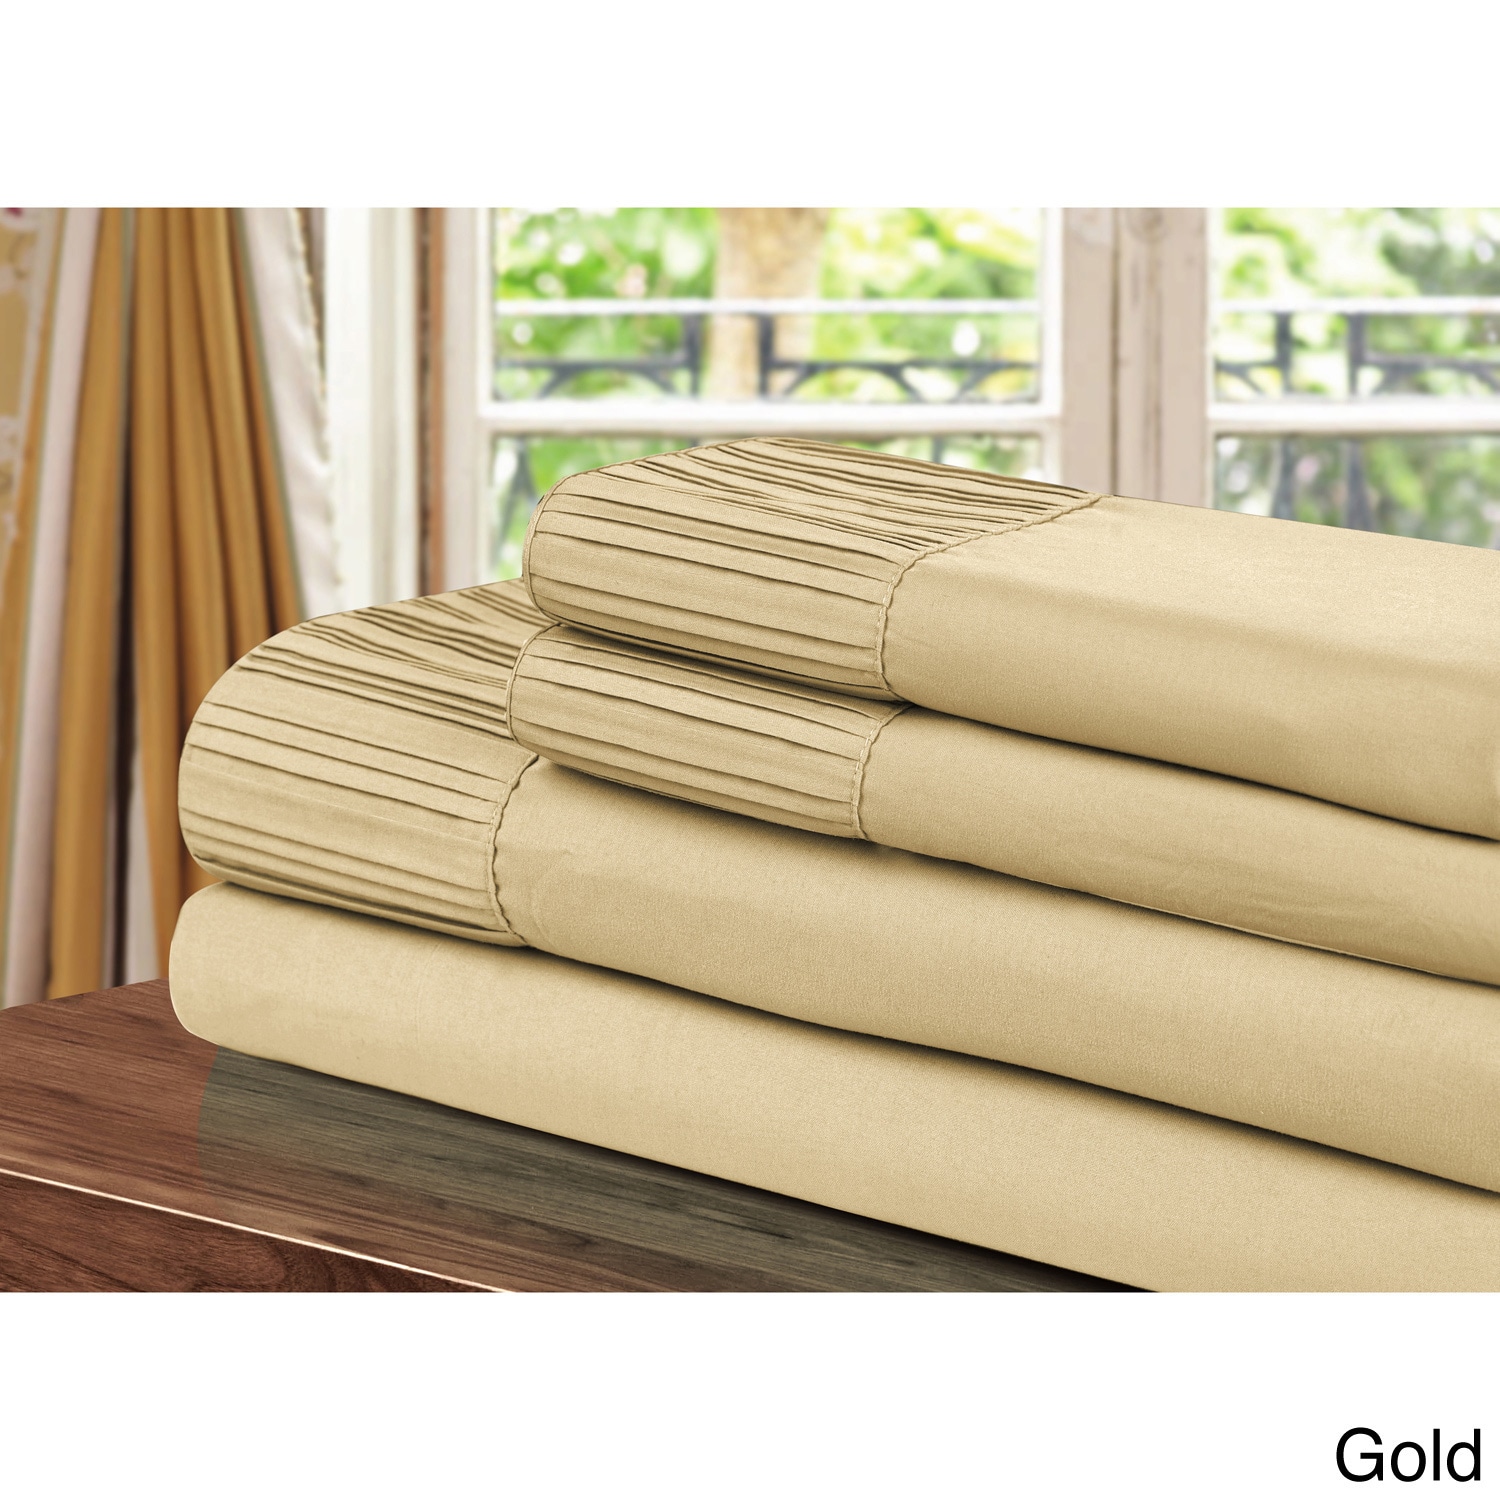 Chic Luxury Home Collection 4 piece Pleated Microfiber Sheet Set Gold Size King